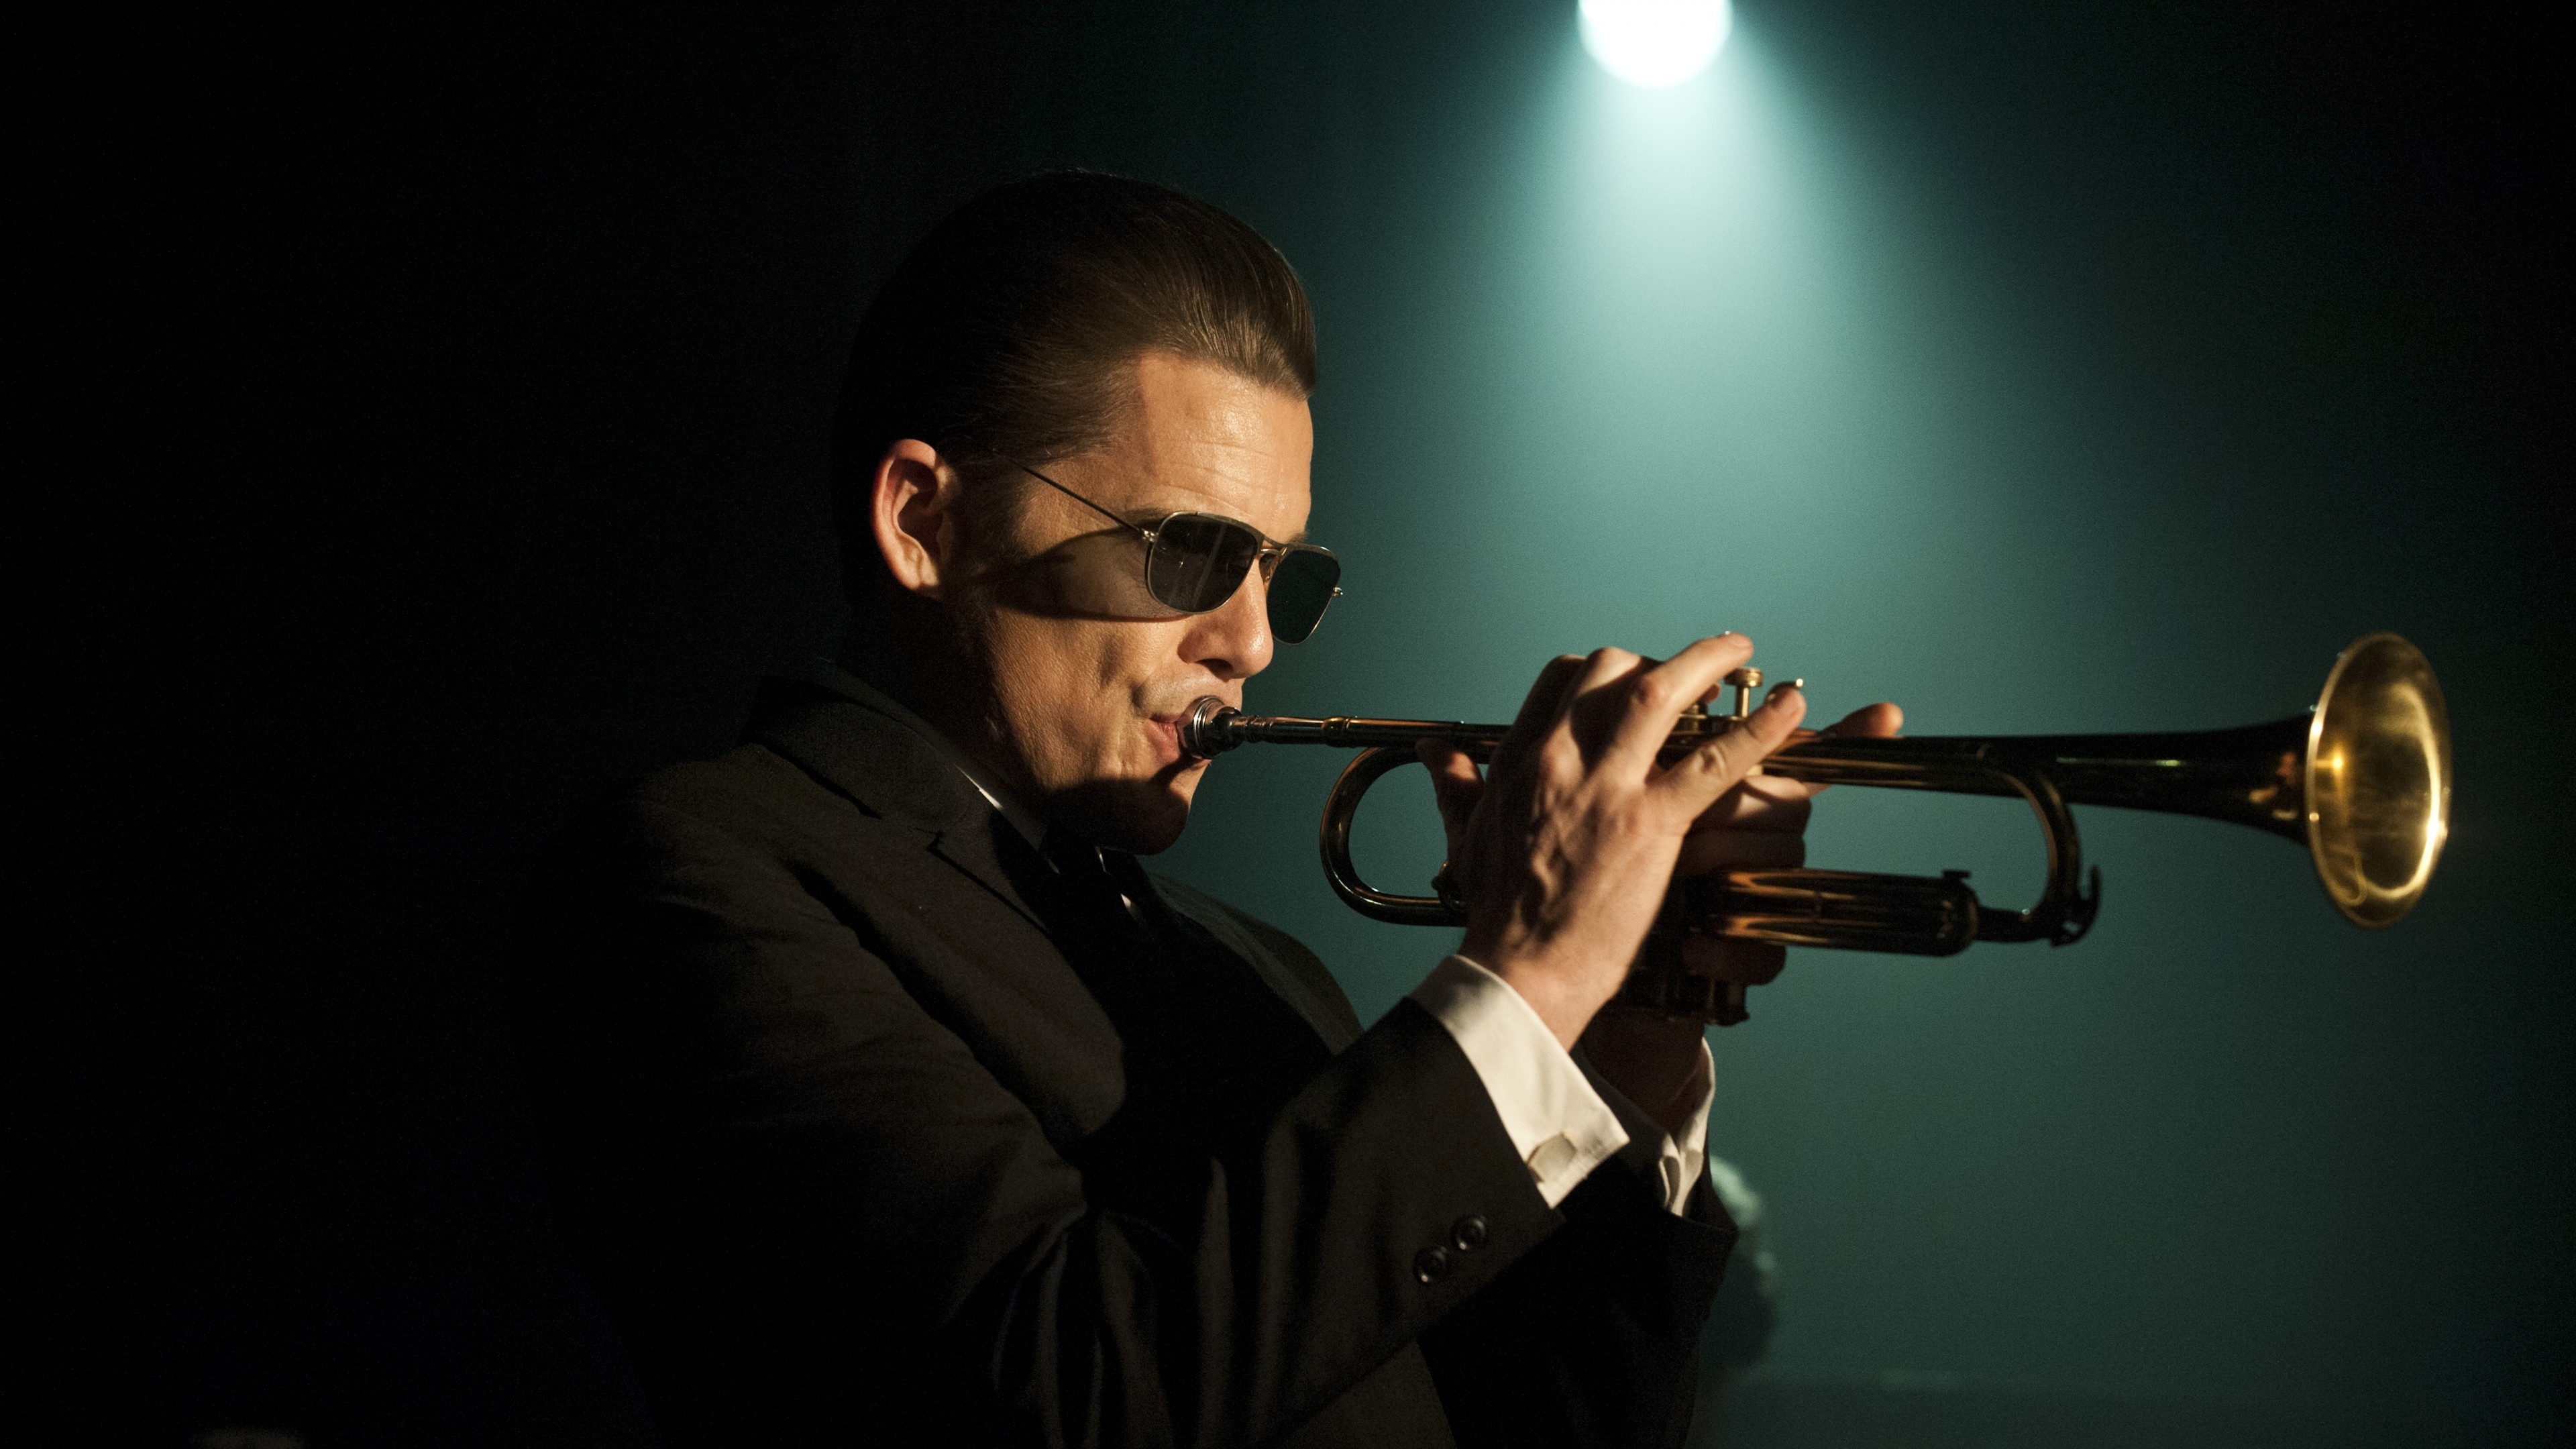 Trumpet: Born to Be Blue, A drama film, Ethan Hawke, American jazz musician Chet Baker. 3840x2160 4K Background.